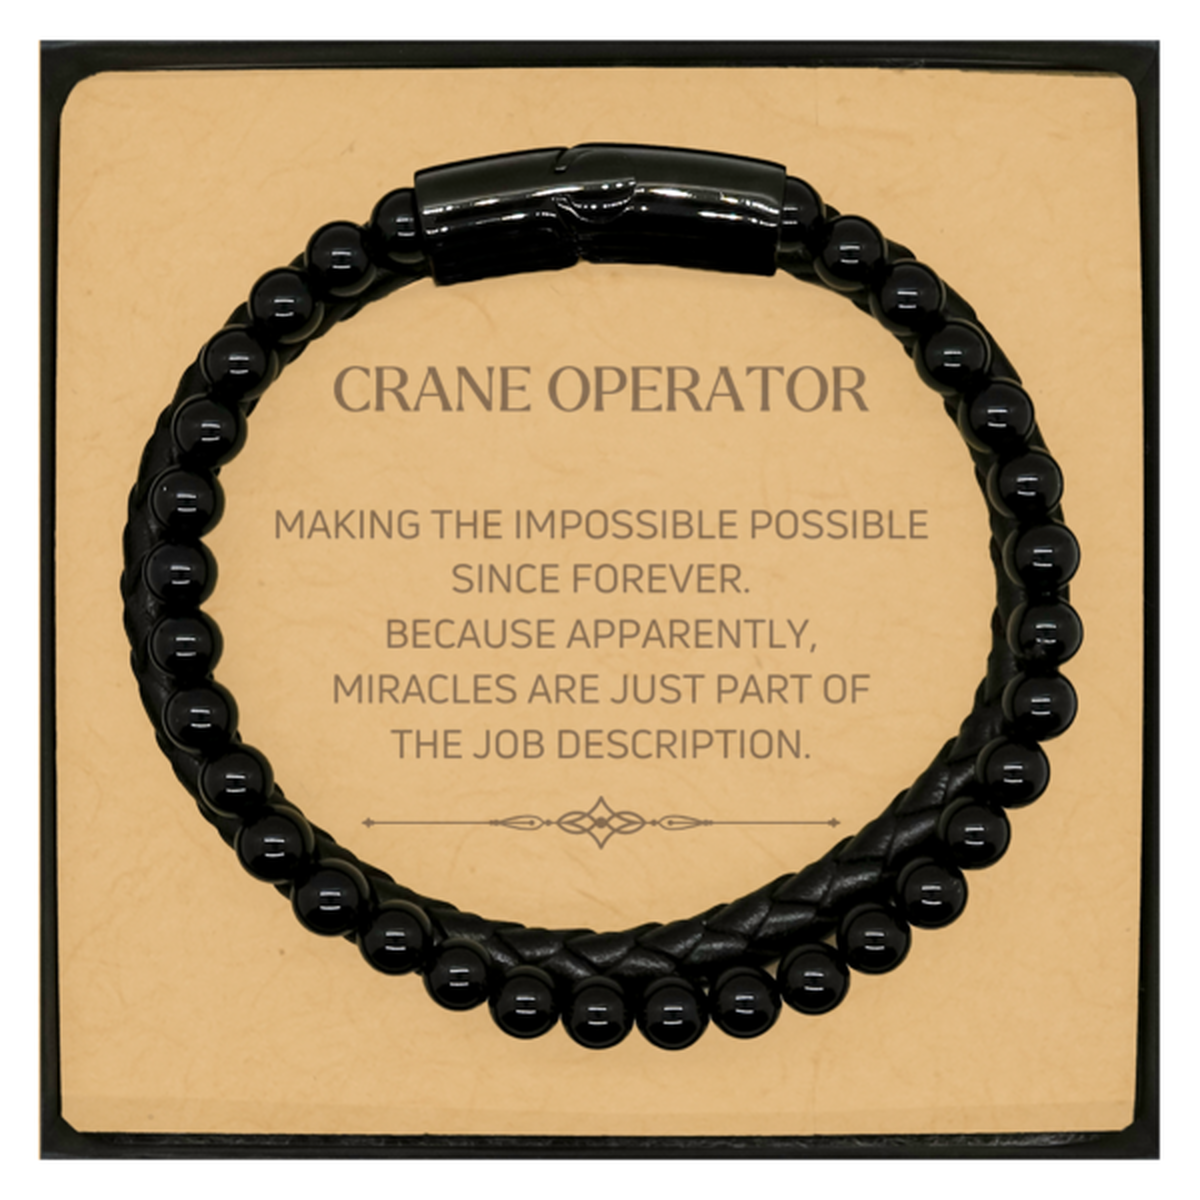 Funny Crane Operator Gifts, Miracles are just part of the job description, Inspirational Birthday Christmas Stone Leather Bracelets For Crane Operator, Men, Women, Coworkers, Friends, Boss